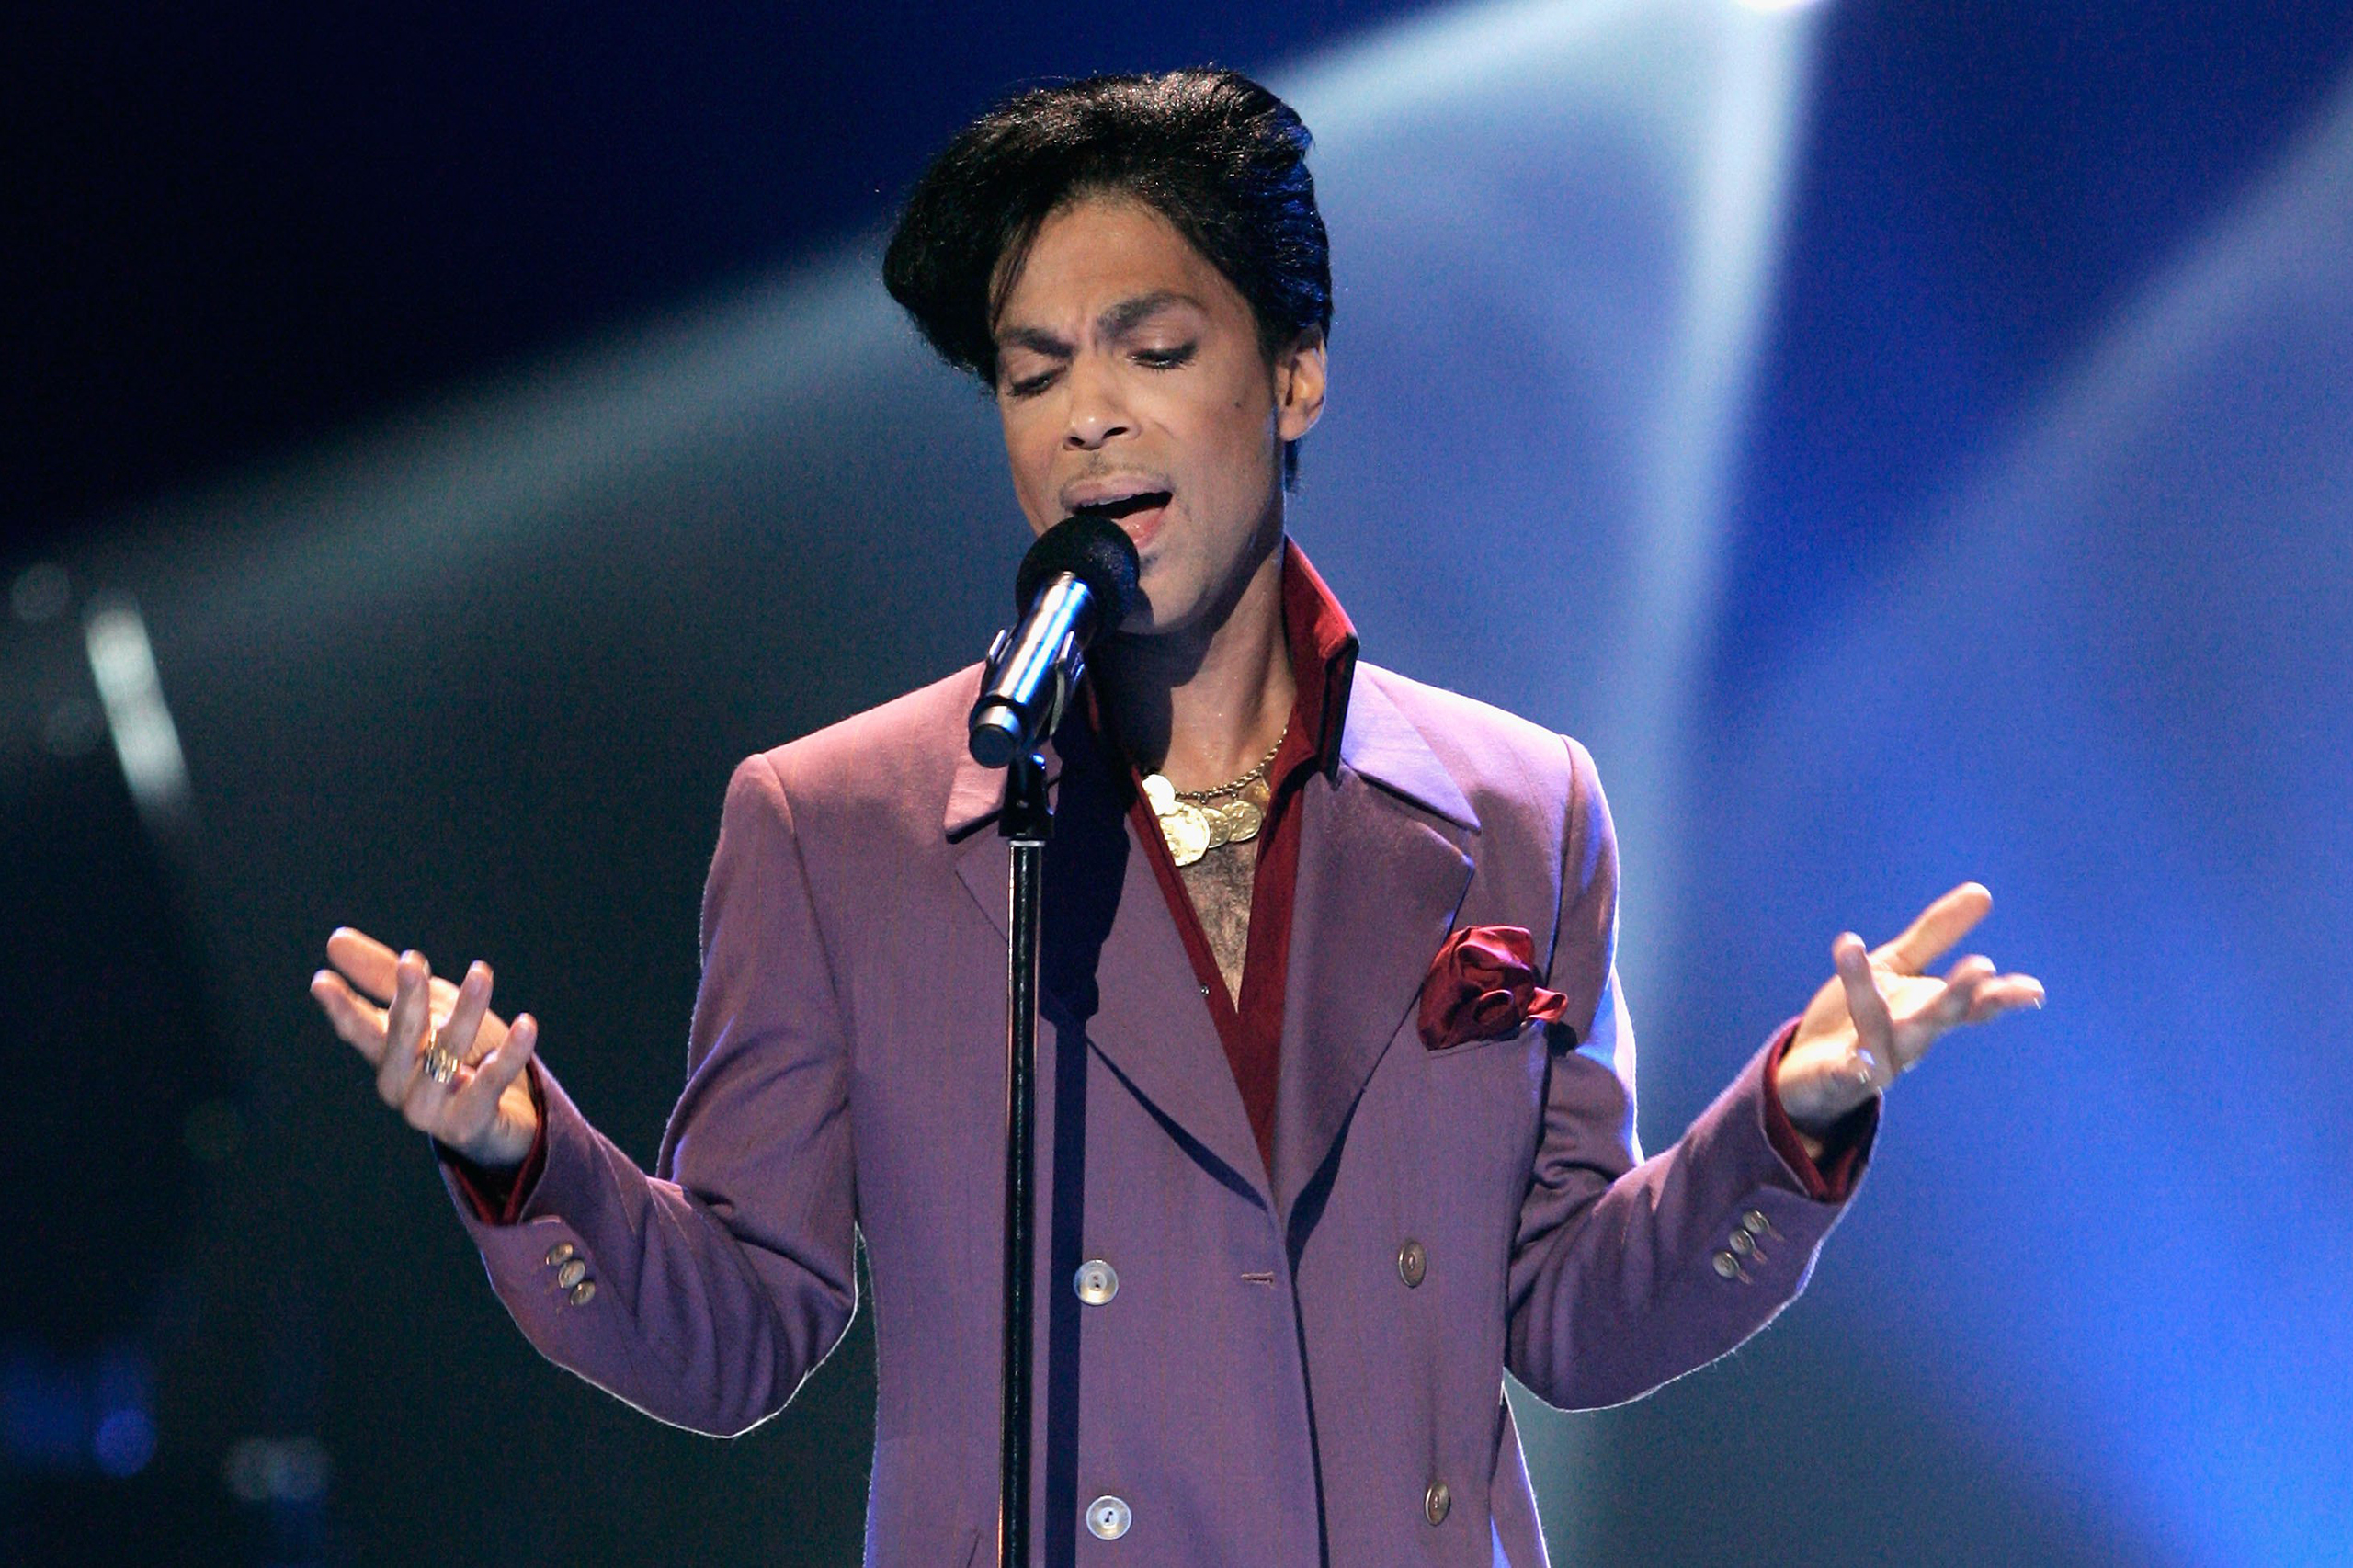 Prince performs onstage during the American Idol Season 5 Finale at the Kodak Theatre in Hollywood, California, on on May 24, 2006. (Vince Bucci—Getty Images)